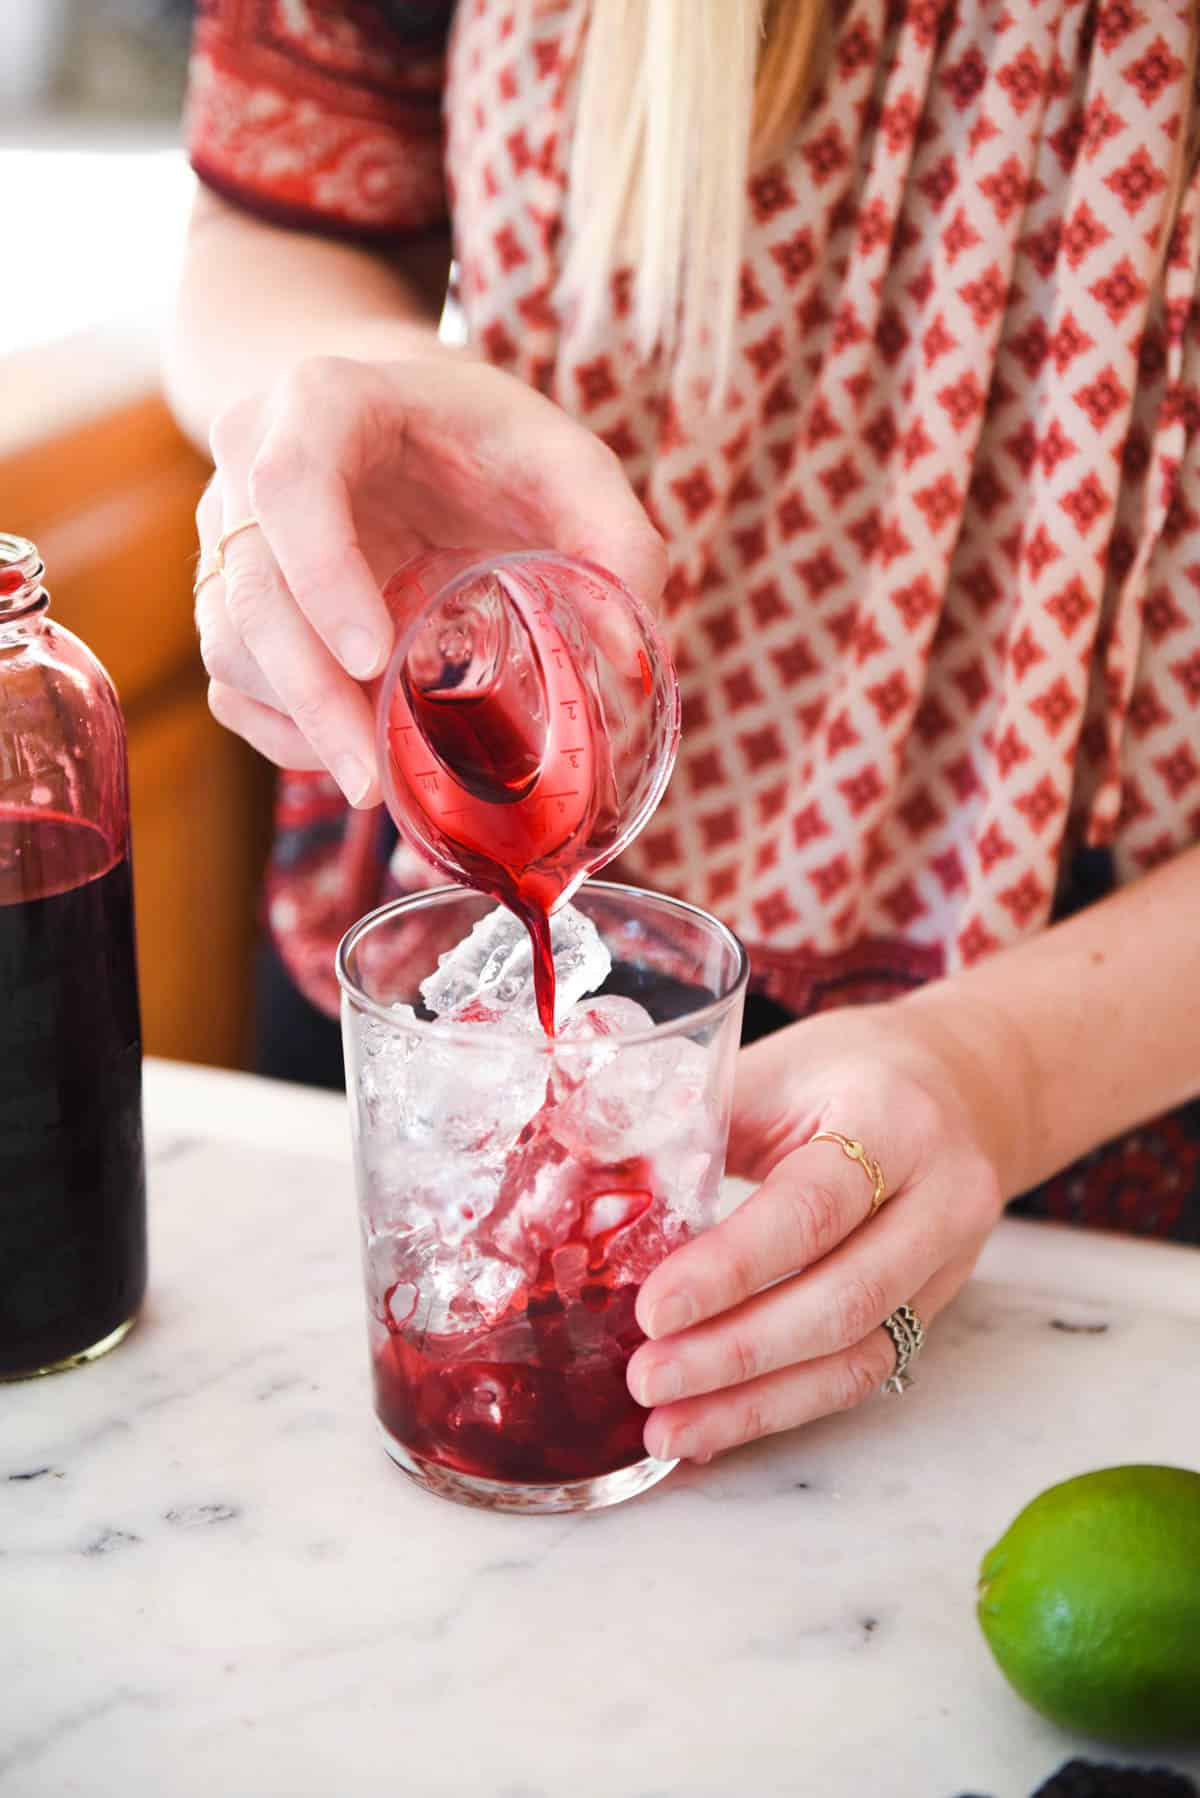 Woman adding blackberry simple syrup to a cocktail glass.